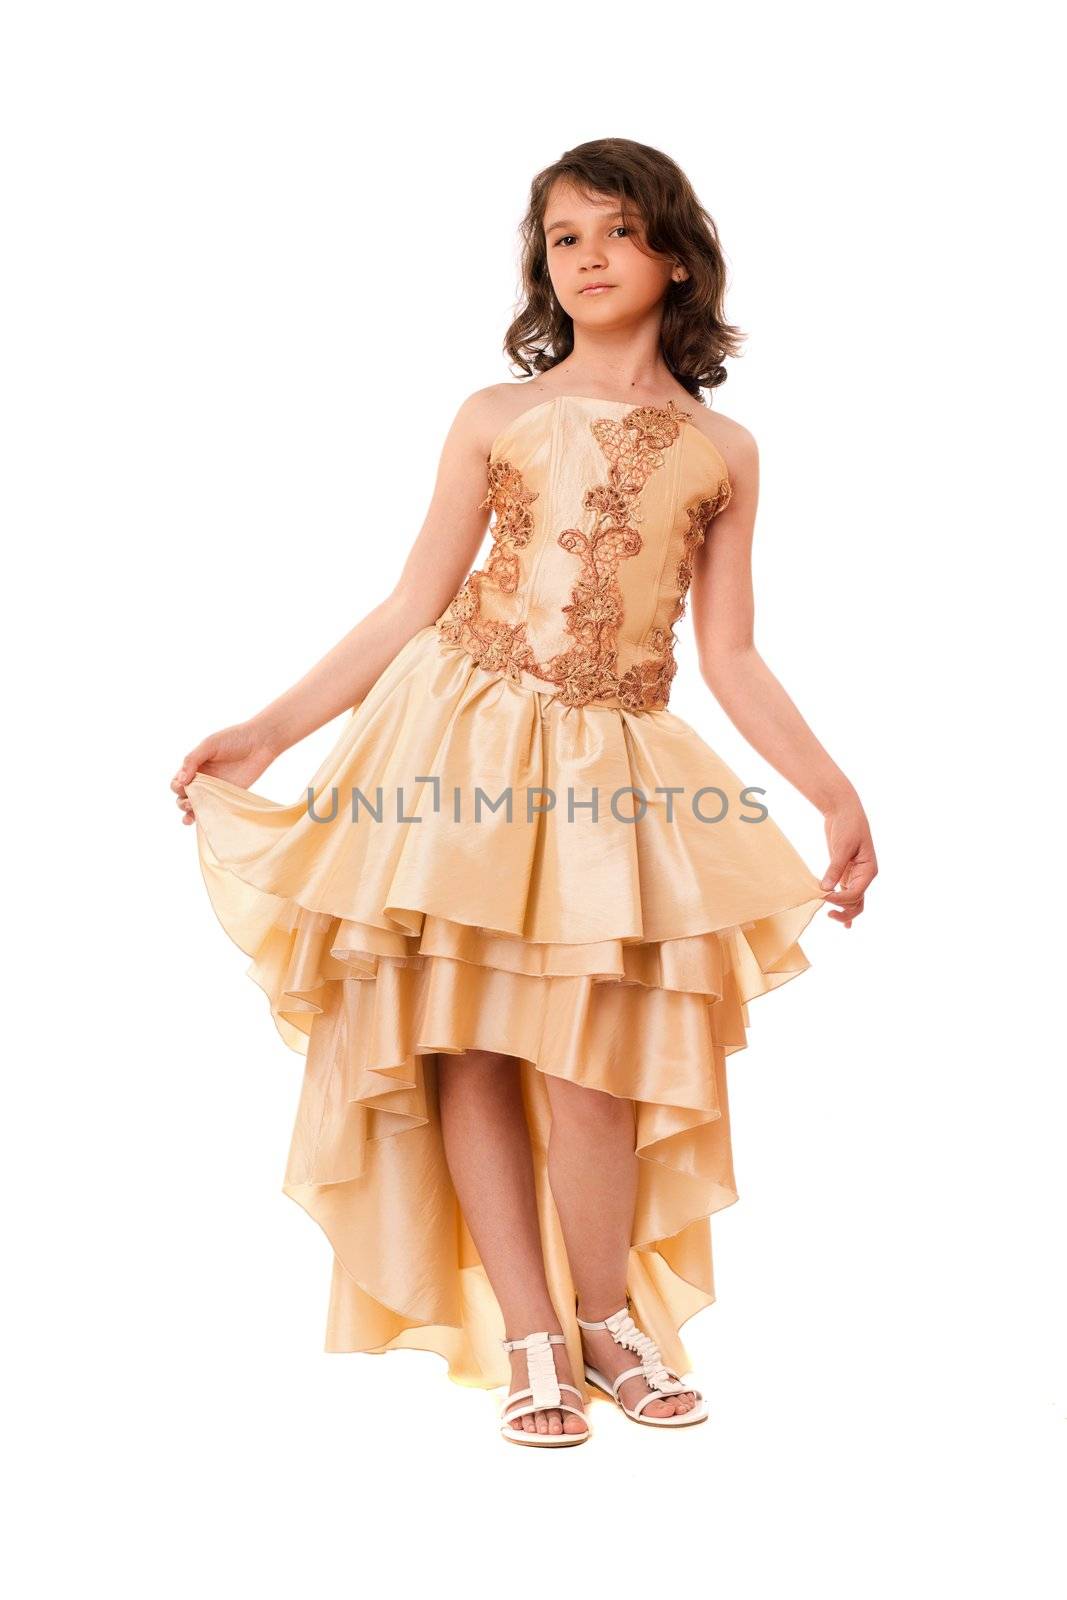 Cute little girl in a chic evening dress. Isolated